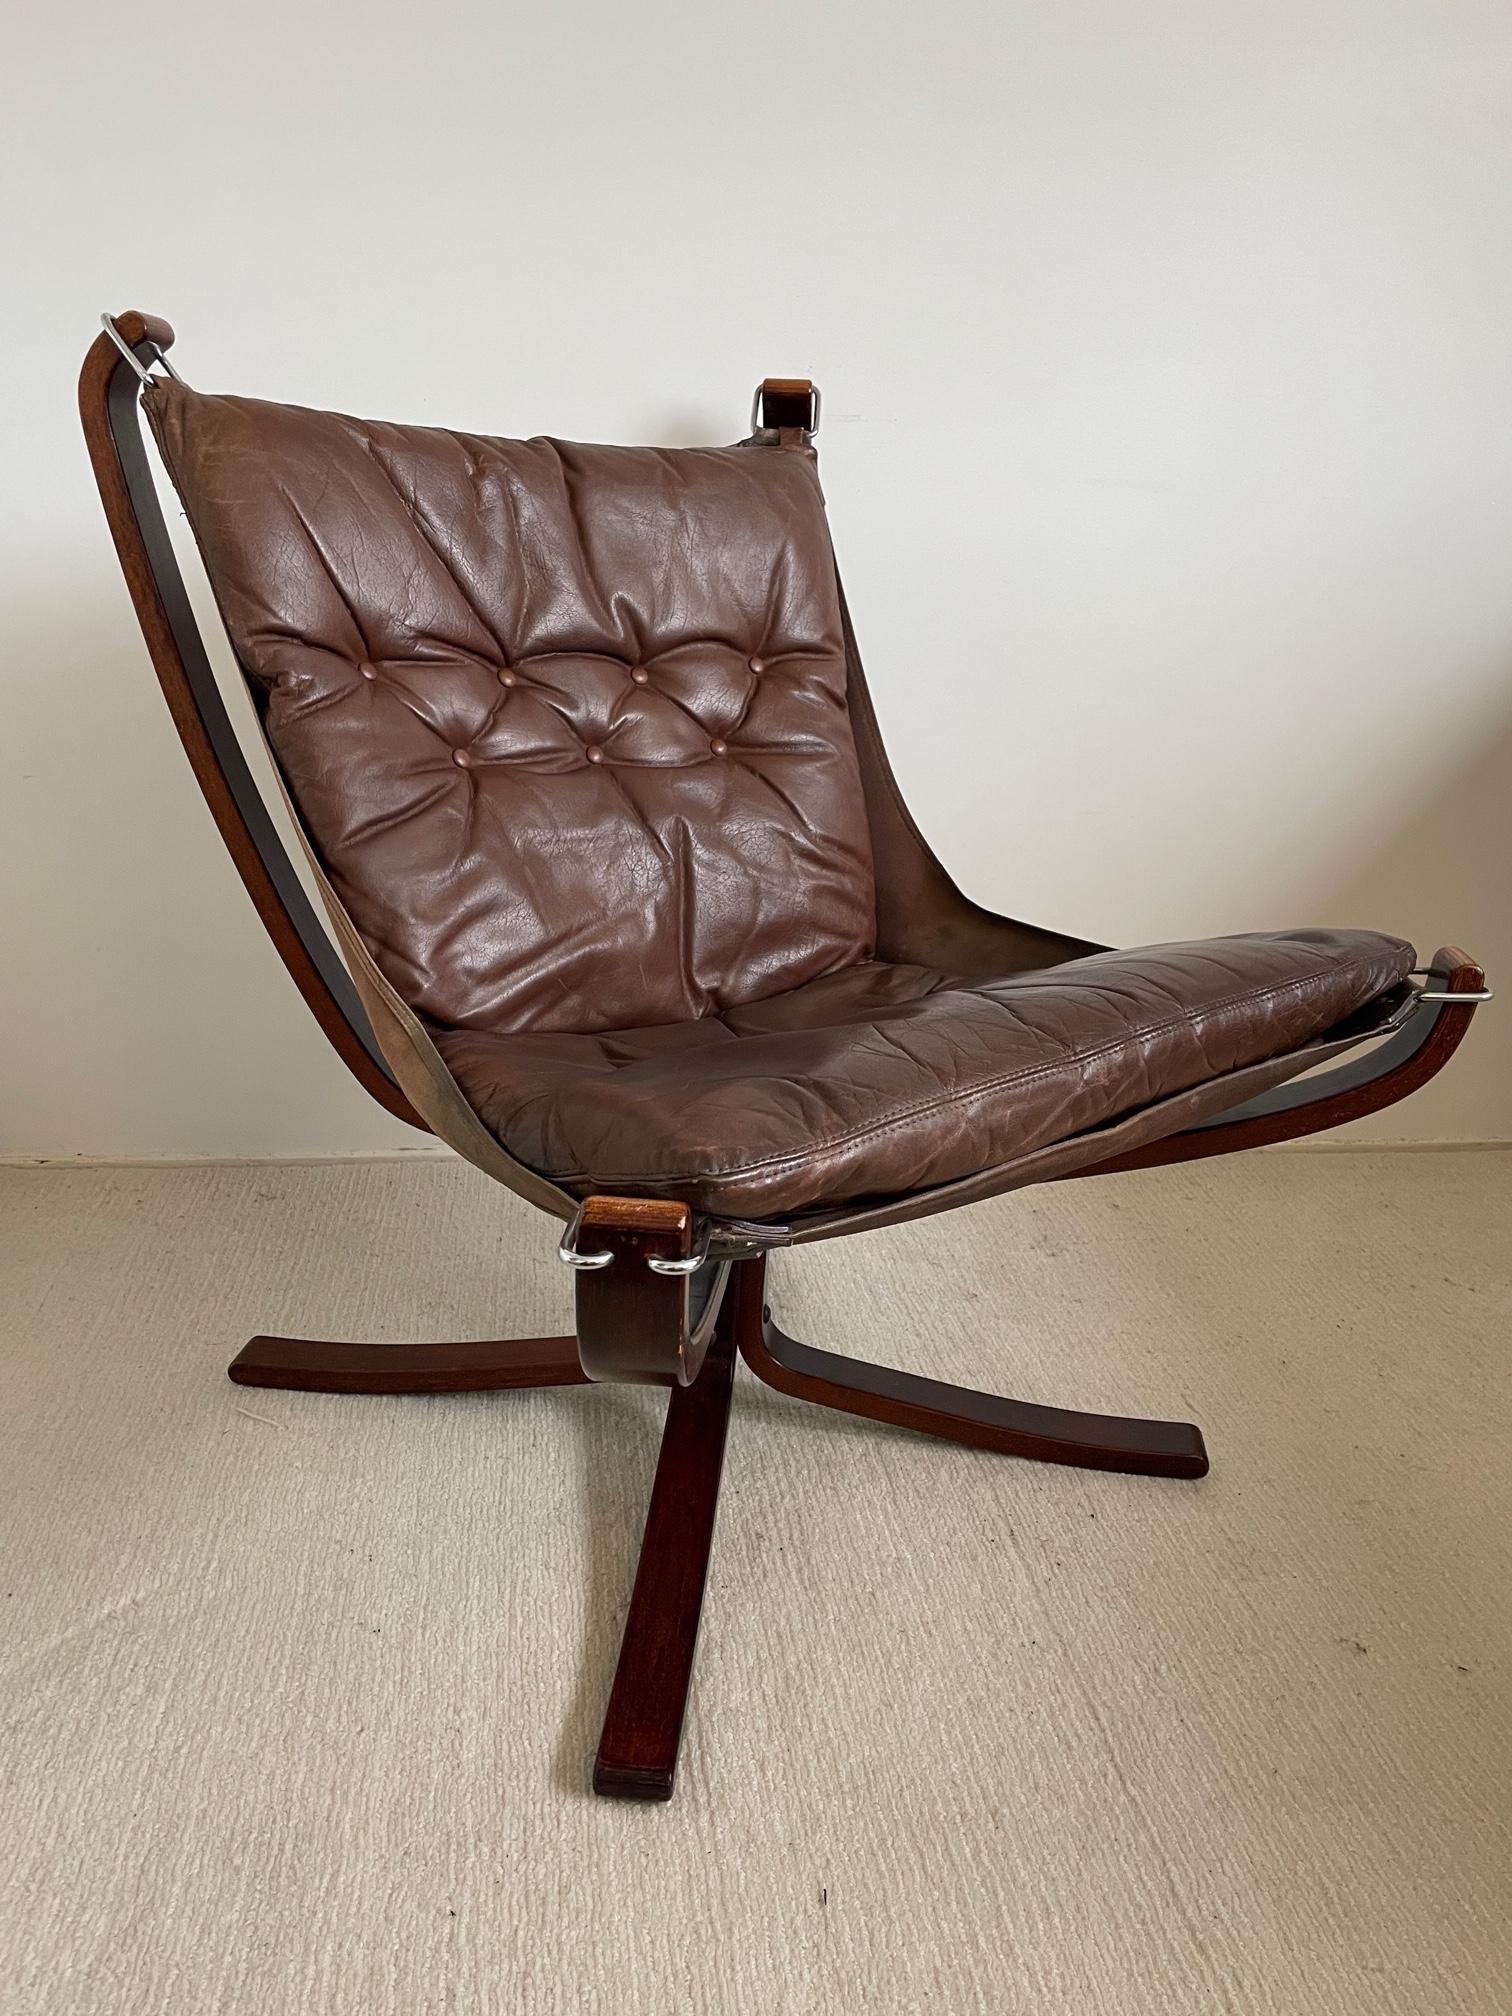 Norwegian Vintage Falcon Chair by Sigurd Ressell for Vatne Møbler, Norway, 1970s Design